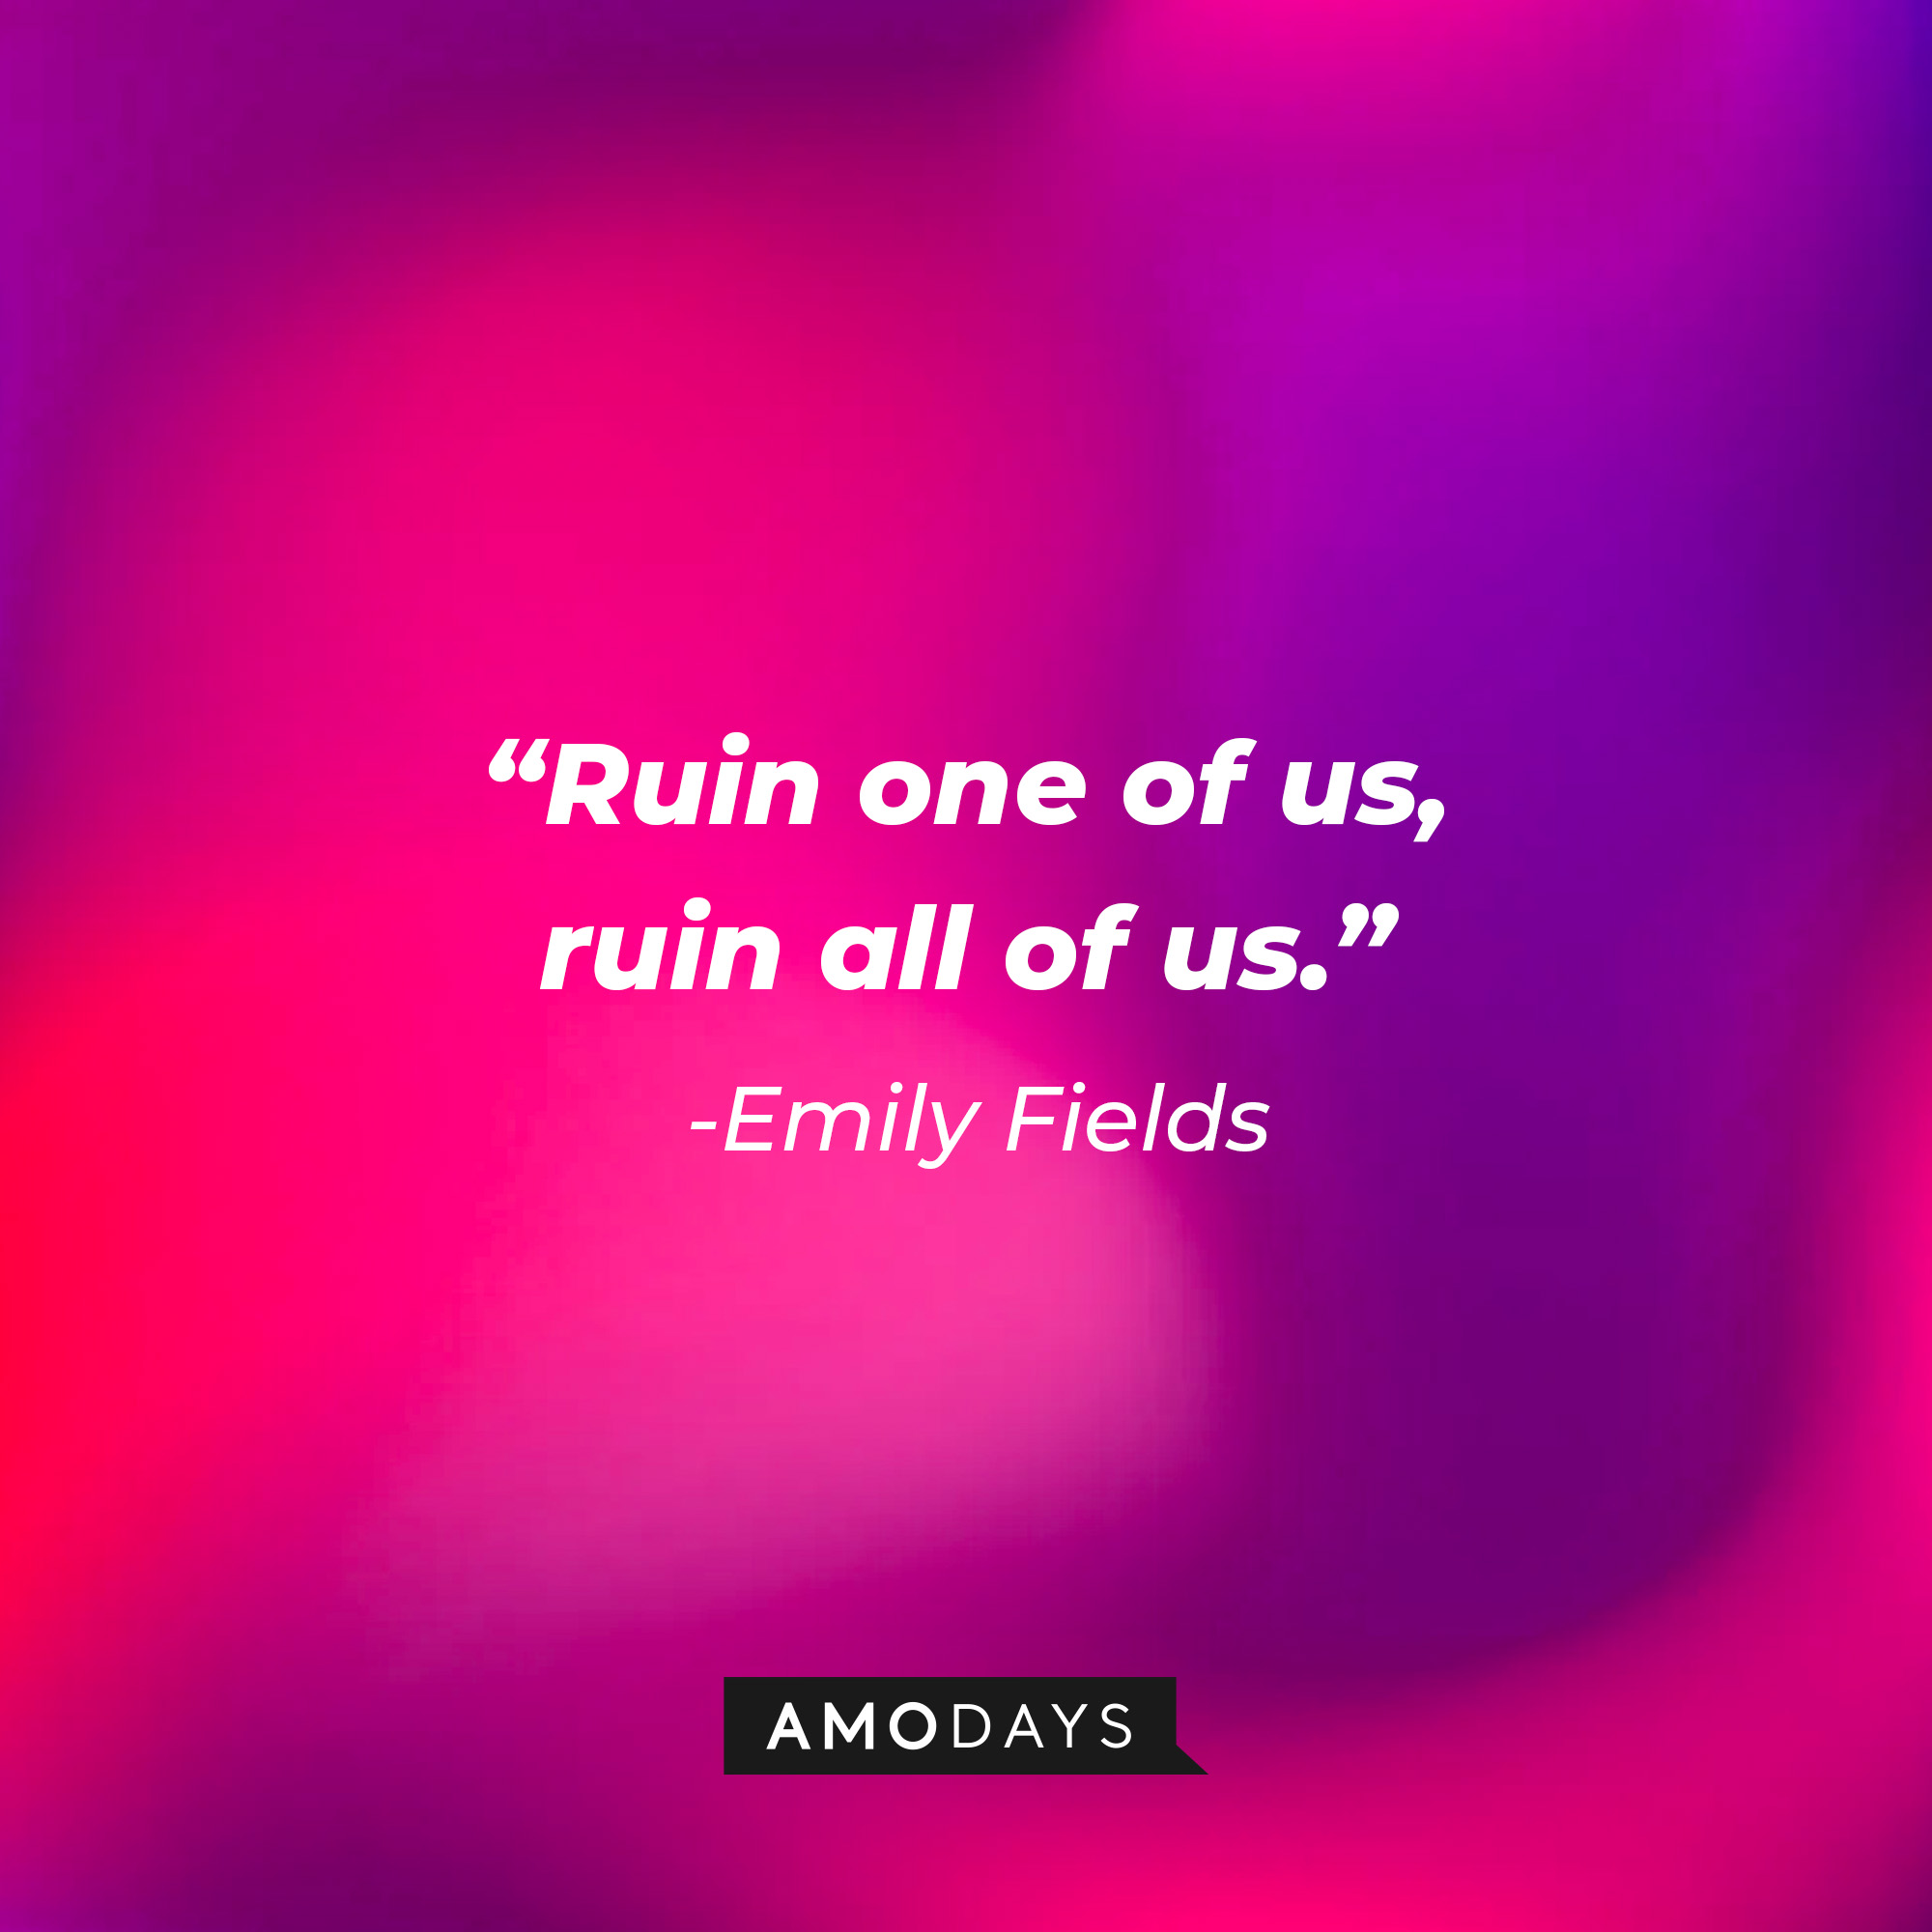 Emily Fields' quote: "Ruin one us, ruin all of us." | Source: Amodays